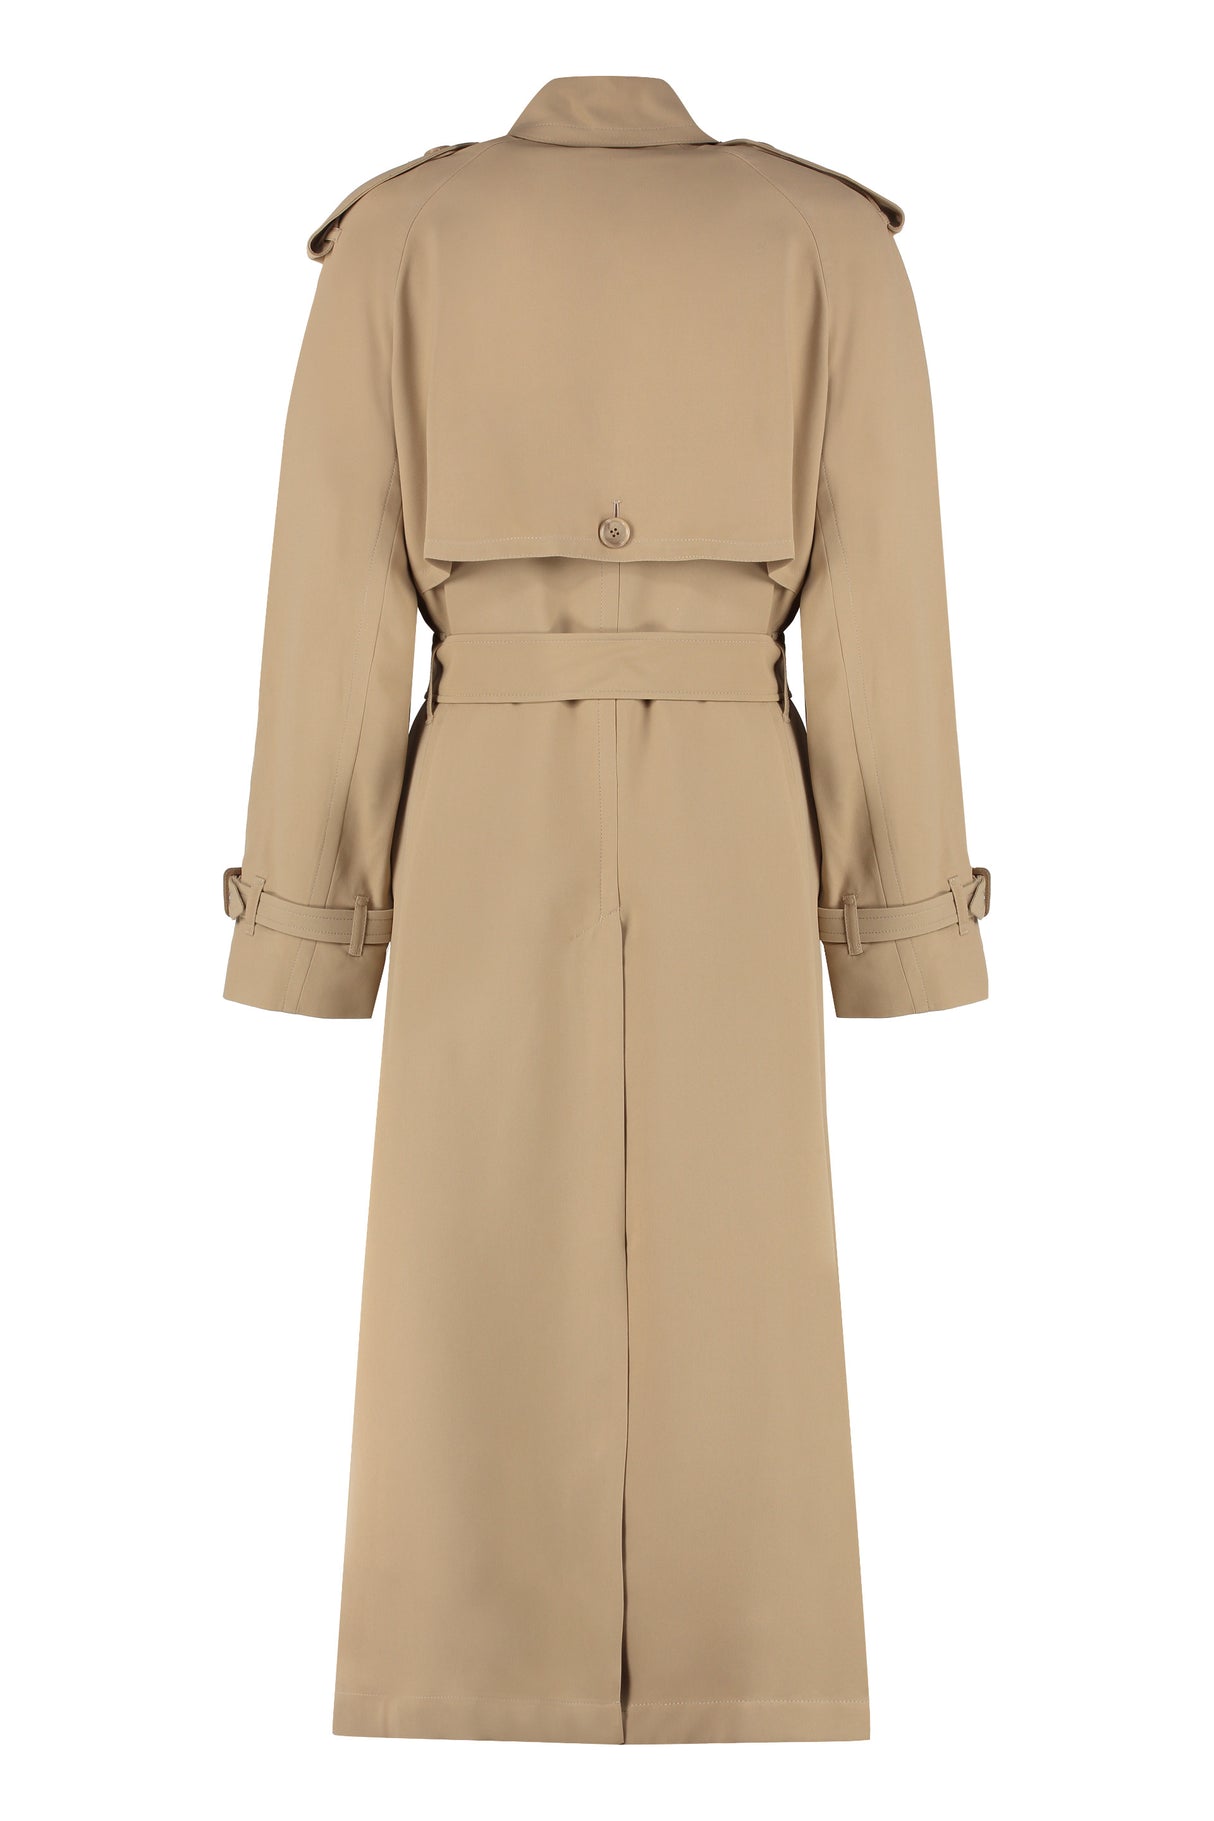 BURBERRY Classic Tan Long Trench Coat with Leather Accents